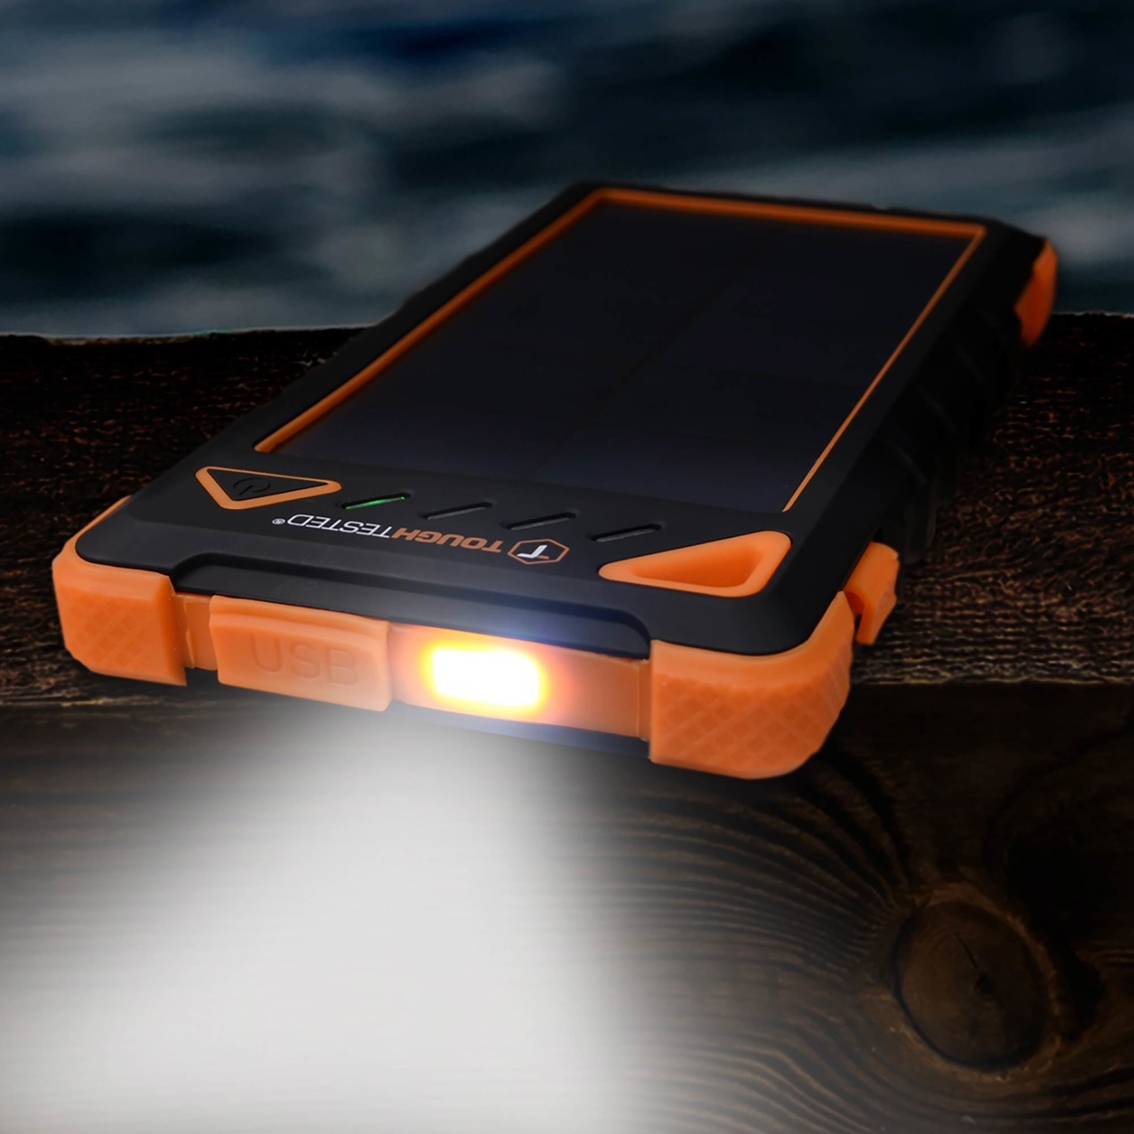 ToughTested 10,000mAh Solar Power Bank with Flashlight - Image 3 of 4